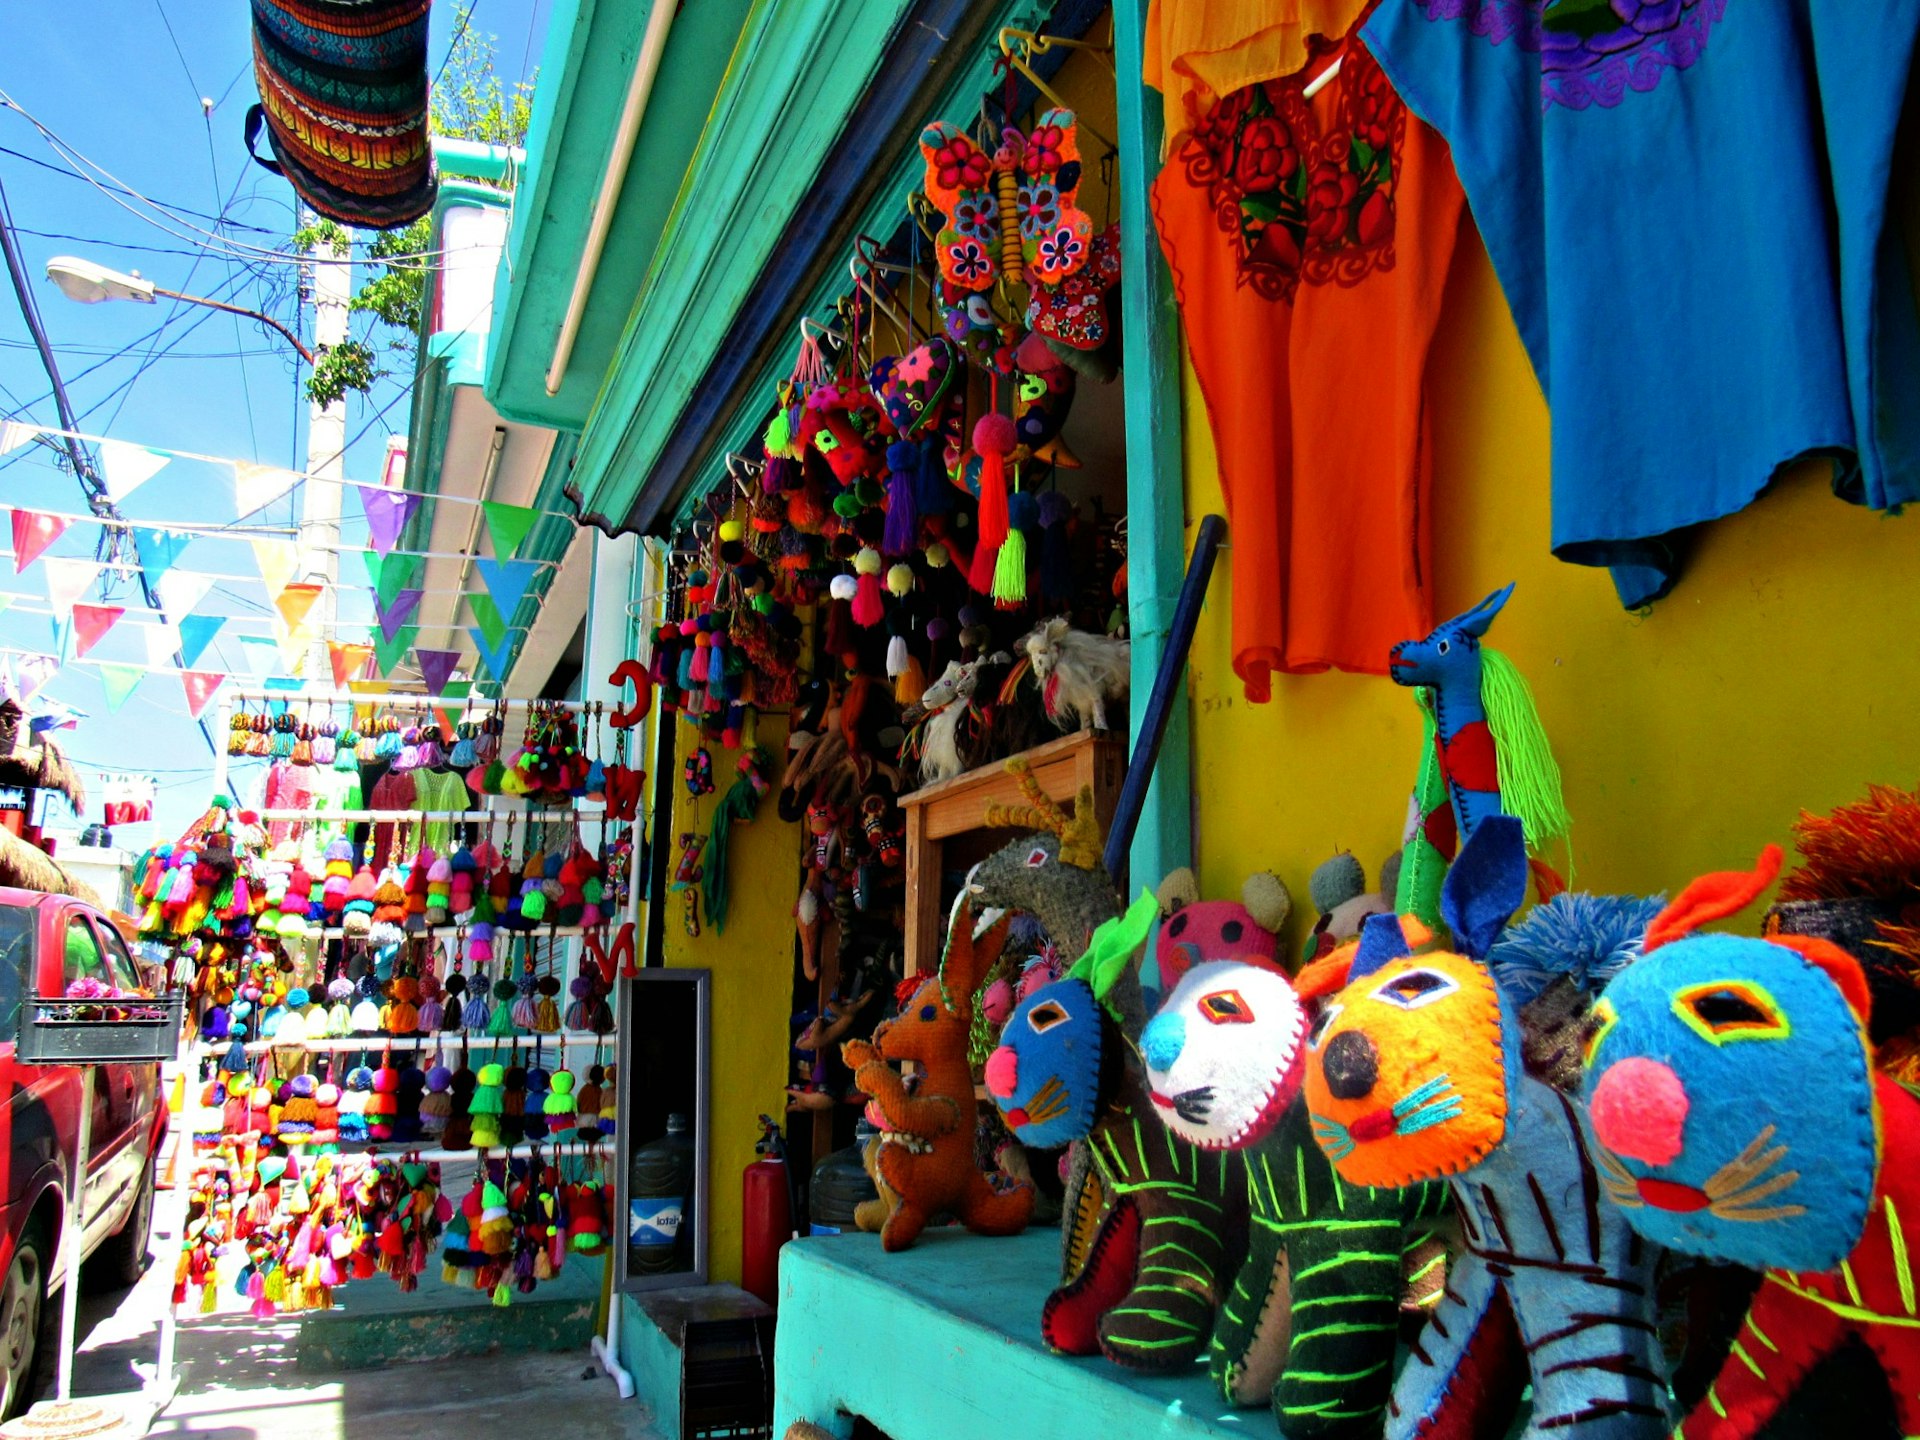 A shop full of colorful Mexican handicrafts is open to the street © Laura Winfree / Lonely Planet